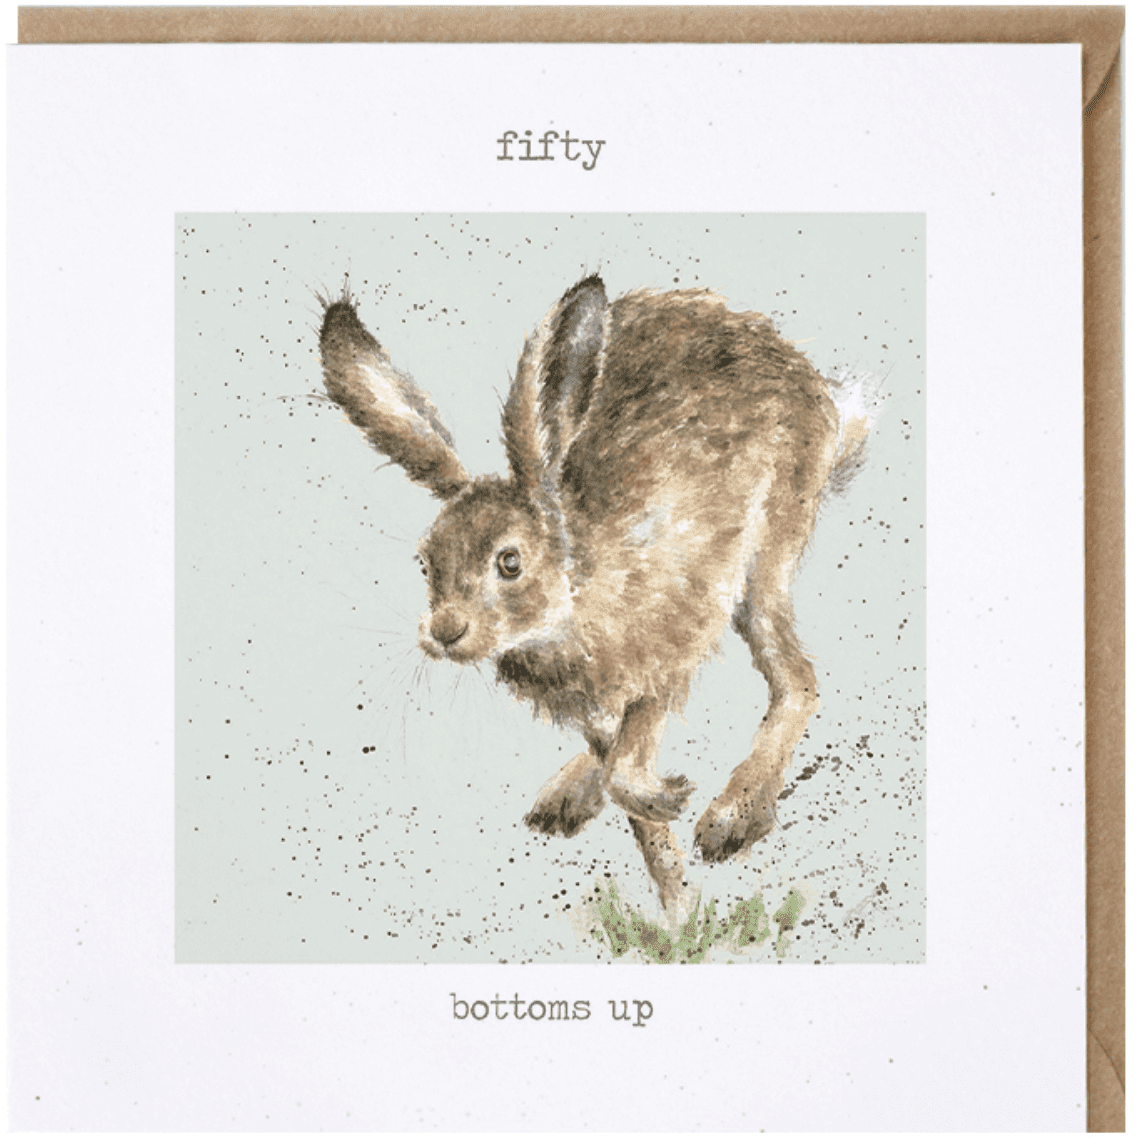 Fifty, Bottoms Up - Greeting Card - Birthday